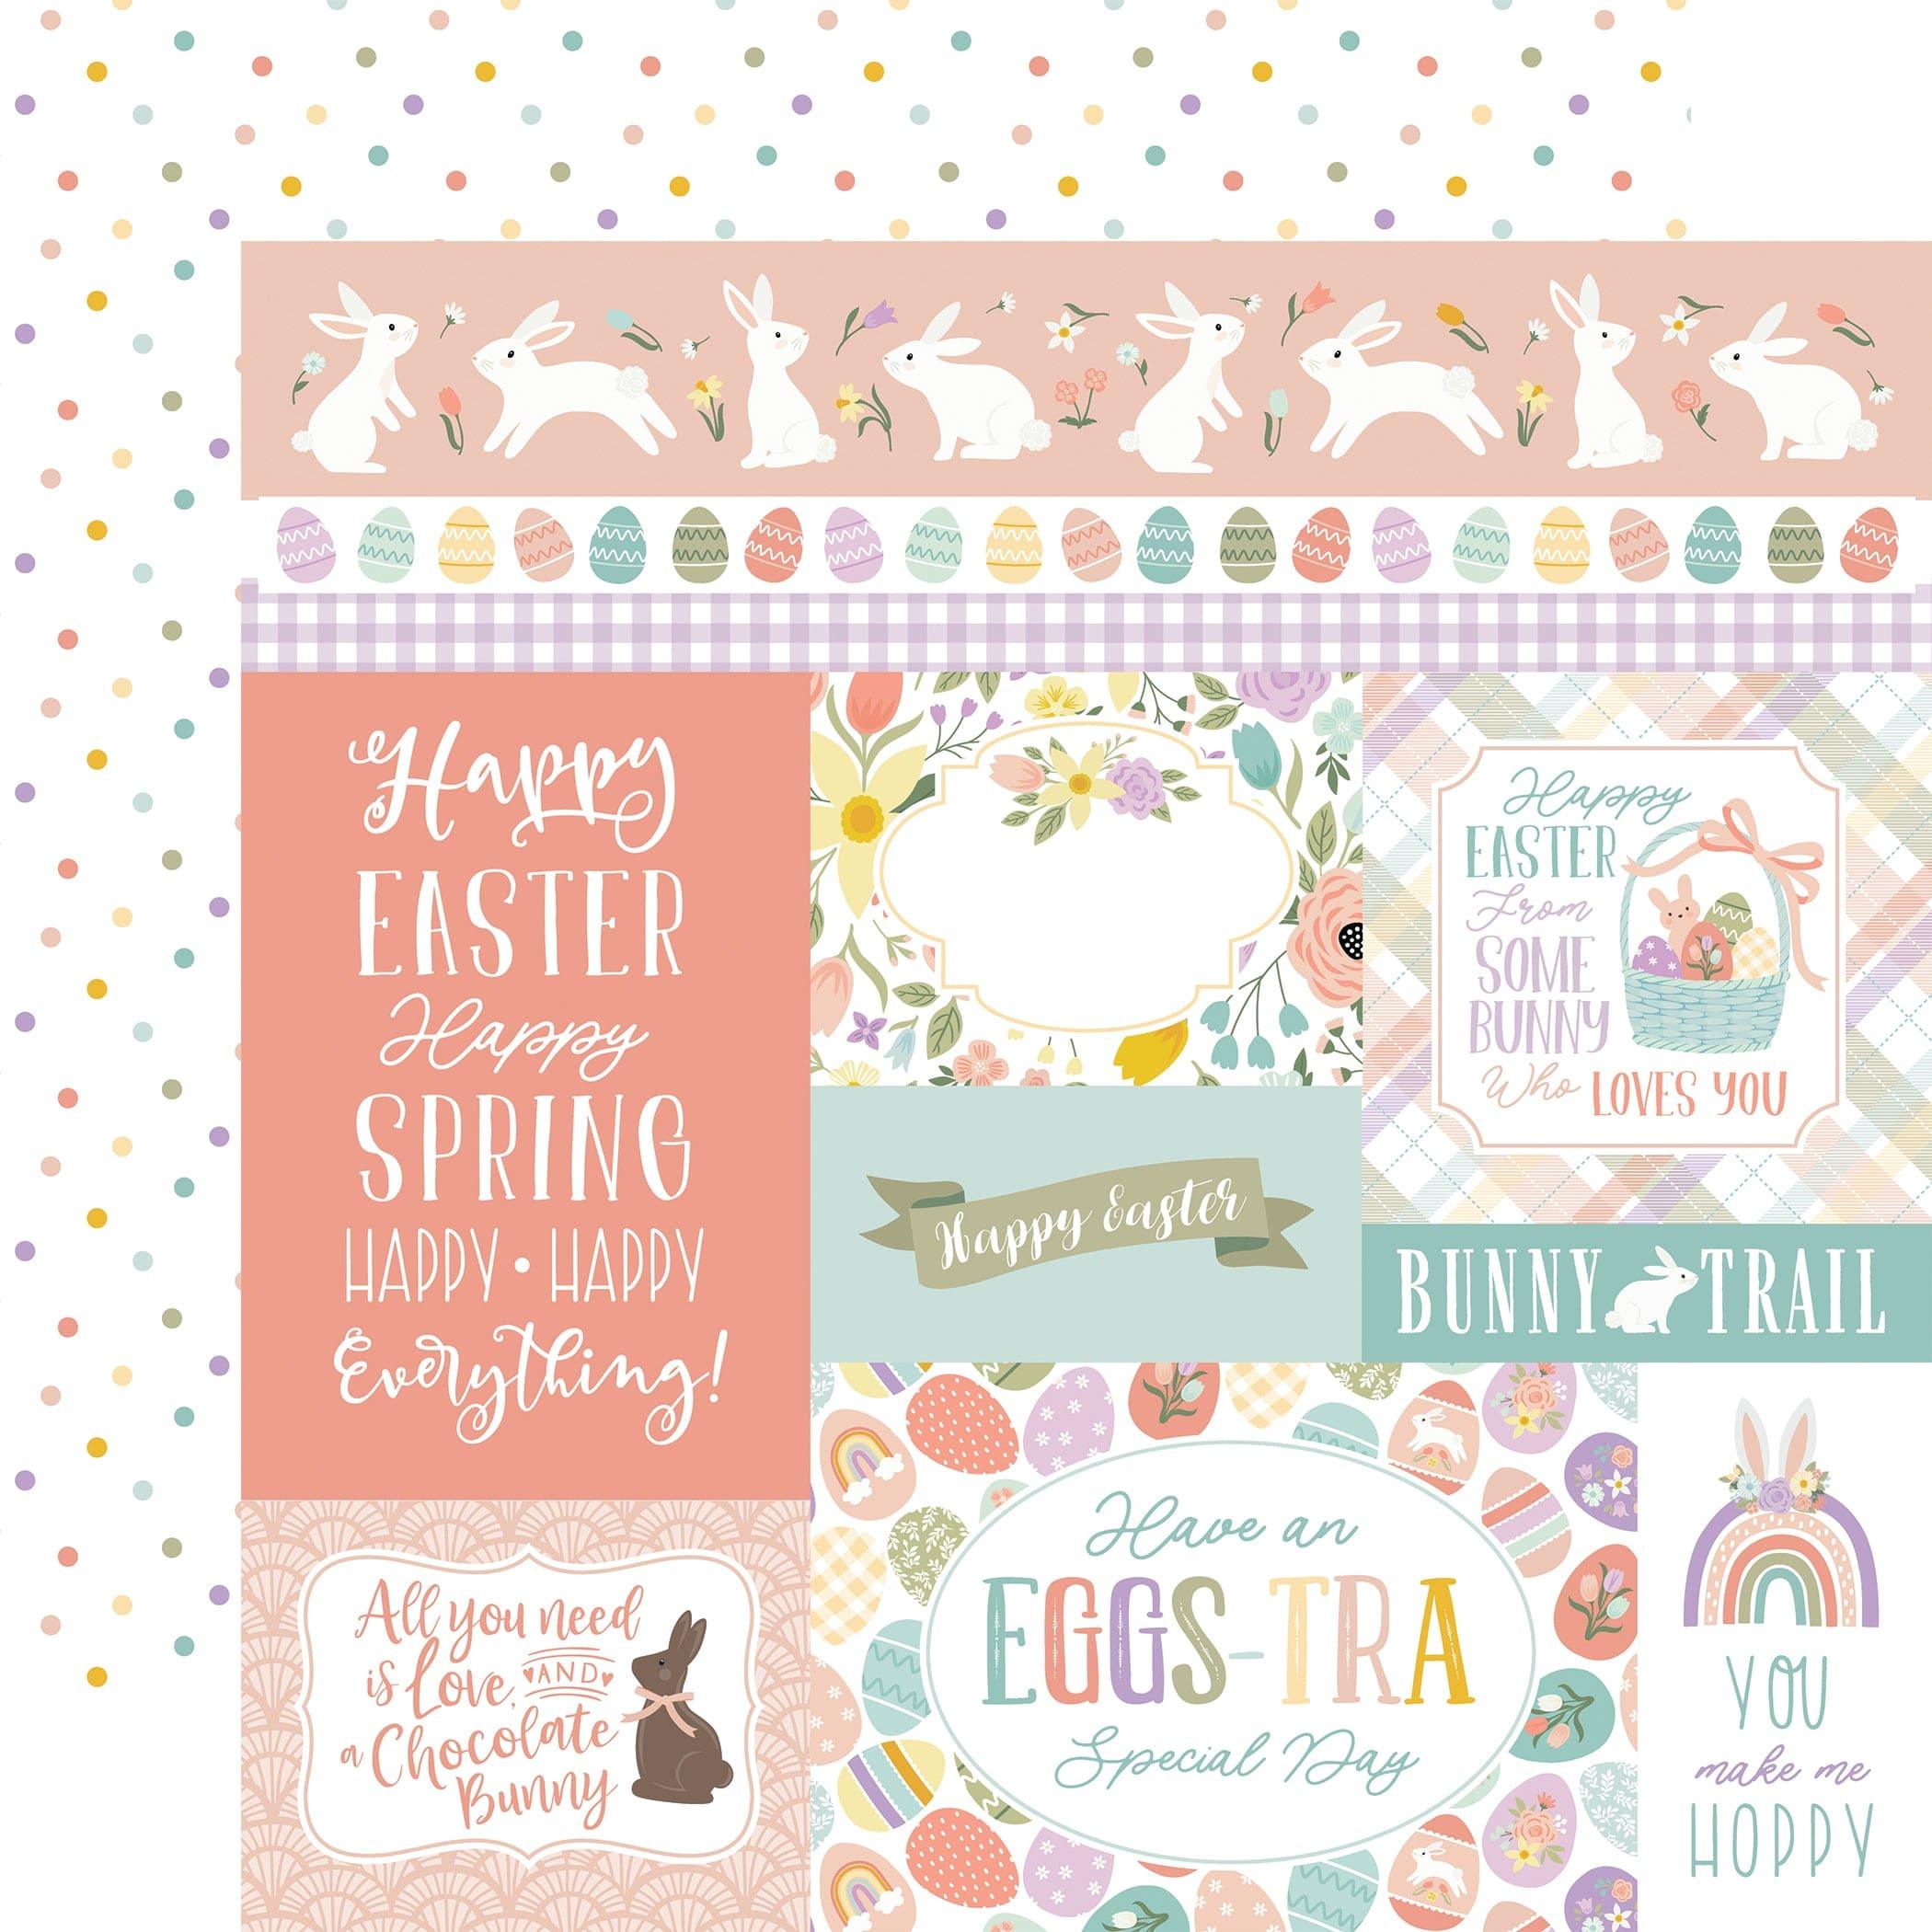 It's Easter Time Collection Journaling Cards 12 x 12 Double-Sided Scrapbook Paper by Echo Park Paper - Scrapbook Supply Companies